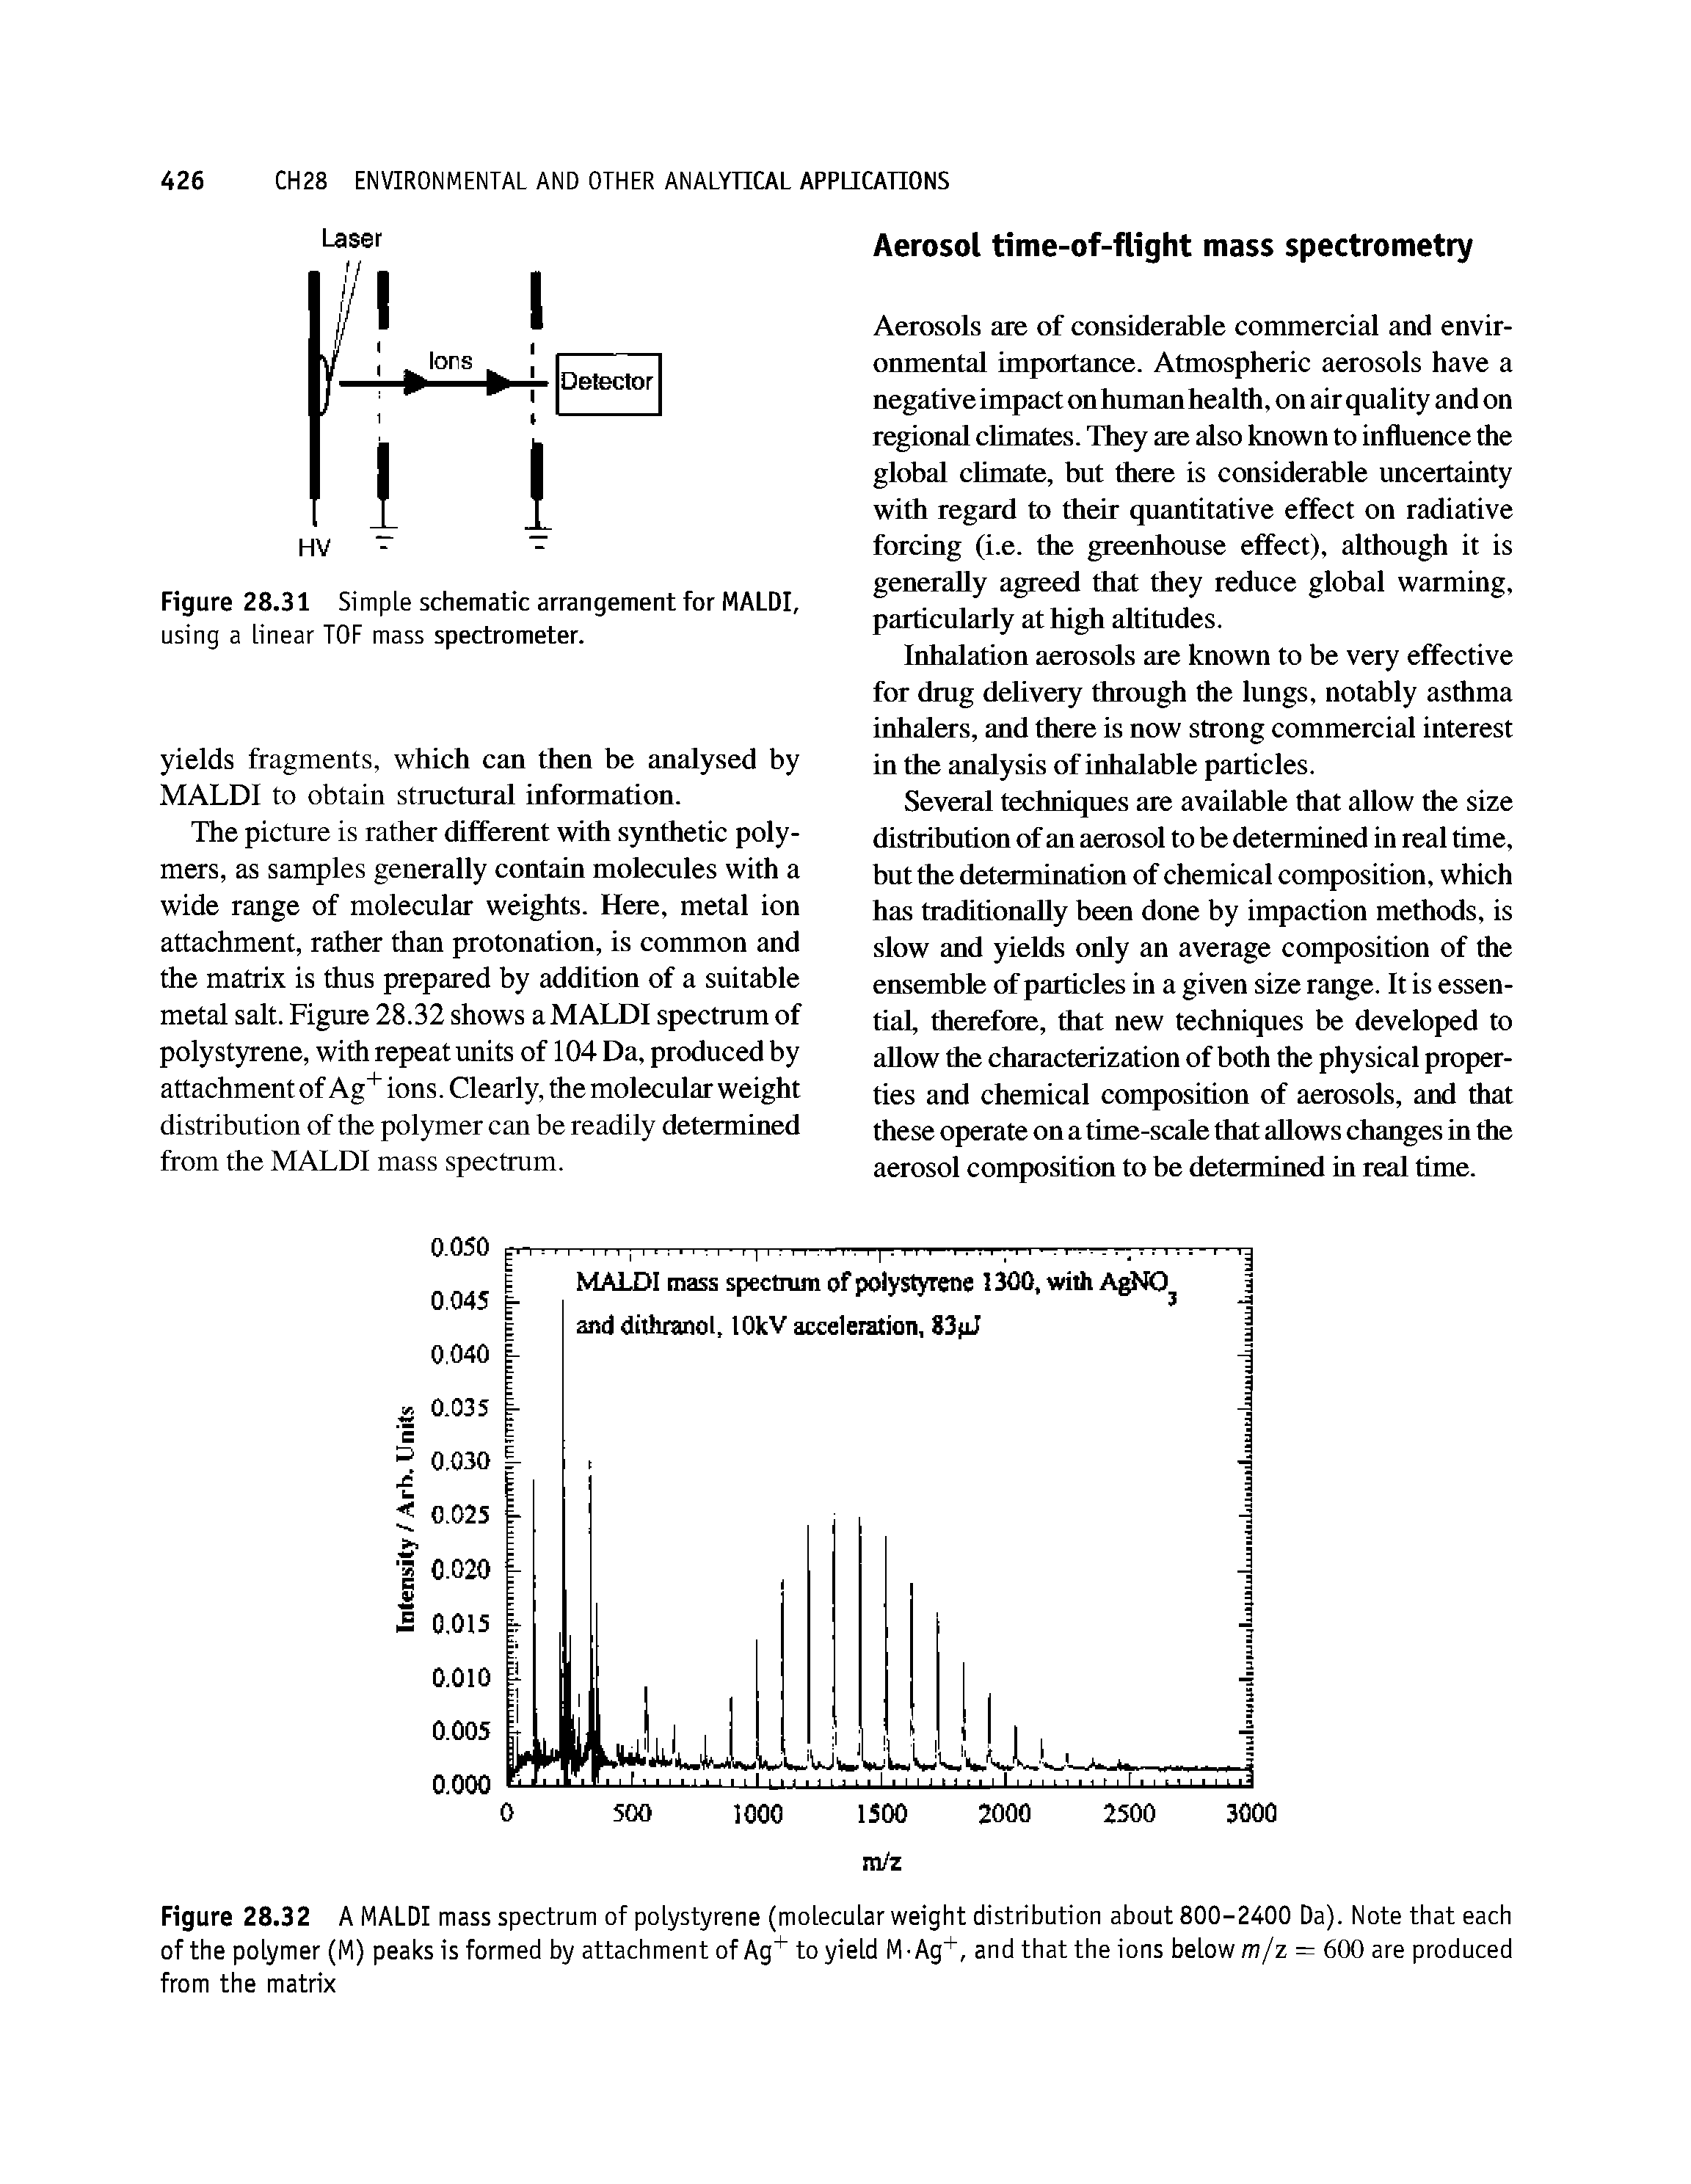 Figure 28.32 A MALDI mass spectrum of polystyrene (molecular weight distribution about 800-2400 Da). Note that each of the polymer (M) peaks is formed by attachment of Ag to yield M Ag+, and that the ions below m/z = 600 are produced from the matrix...